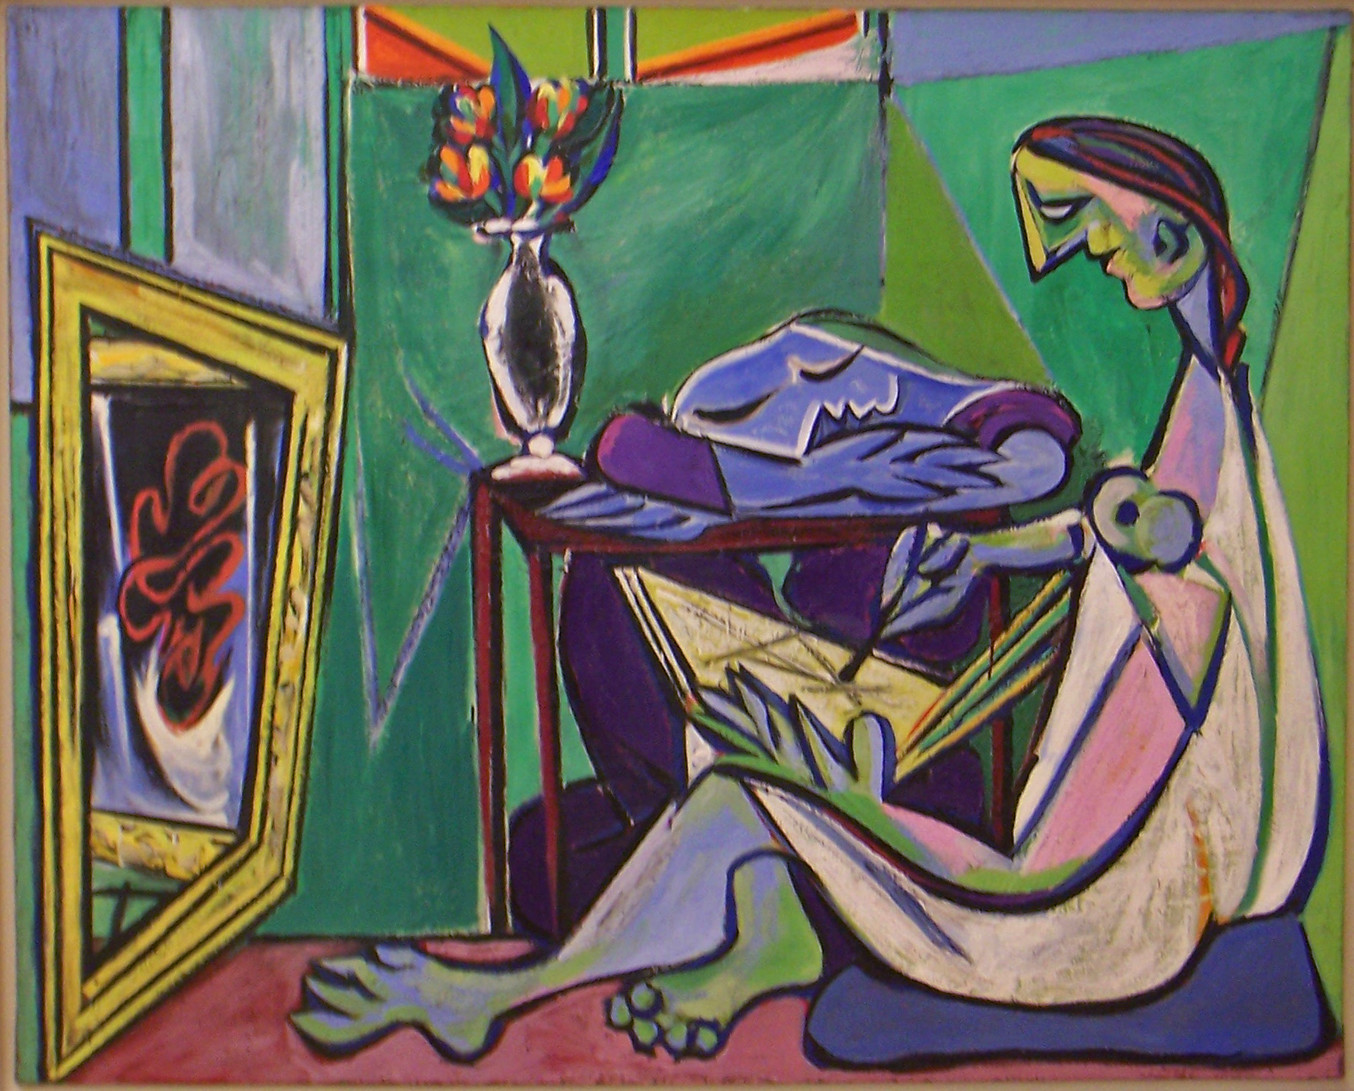 Picasso die Muse